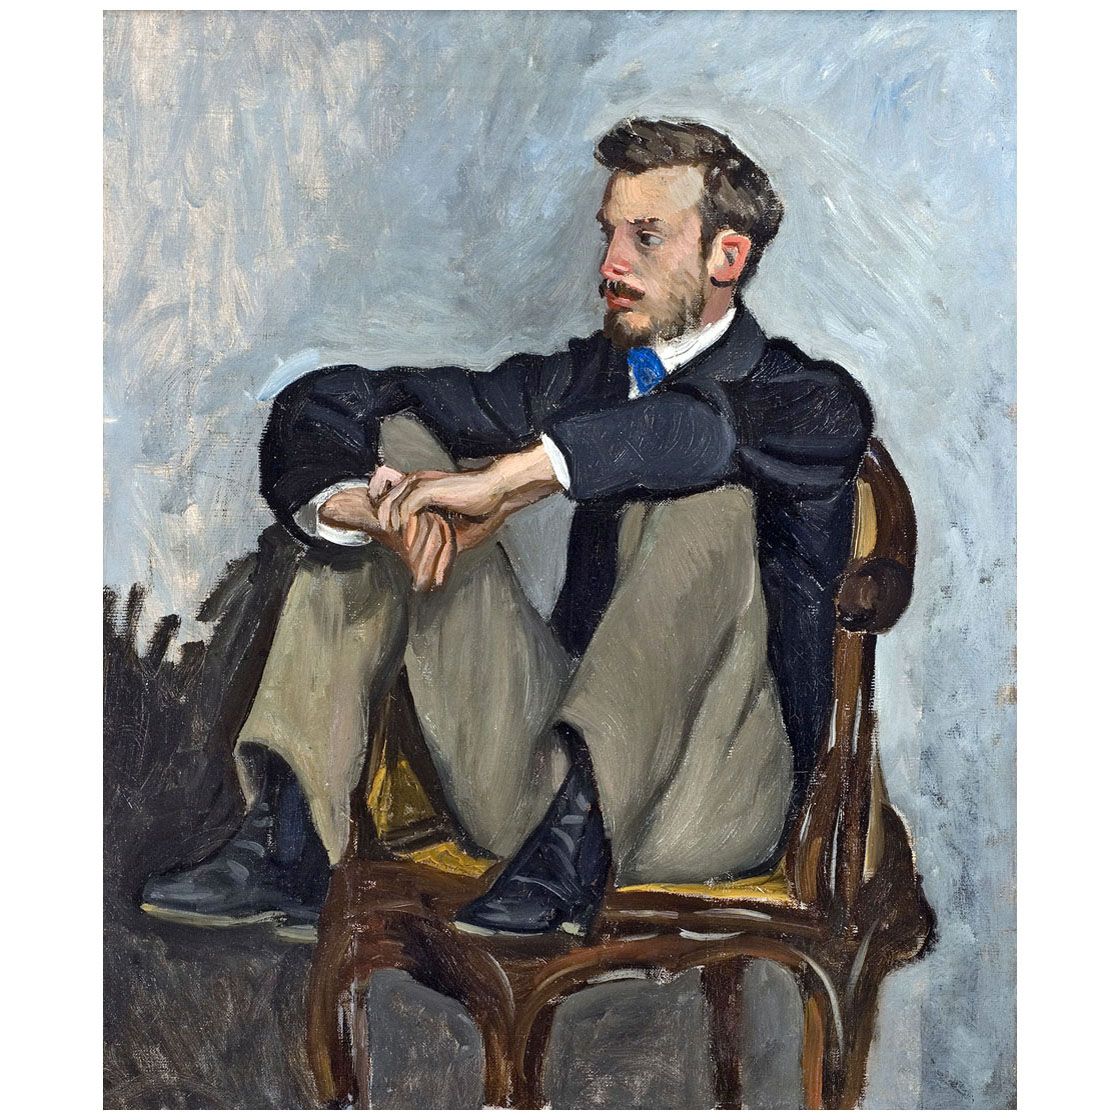 Frederic Bazille. Pierre-Auguste Renoir. 1867. Musee Fabre, Montpellier